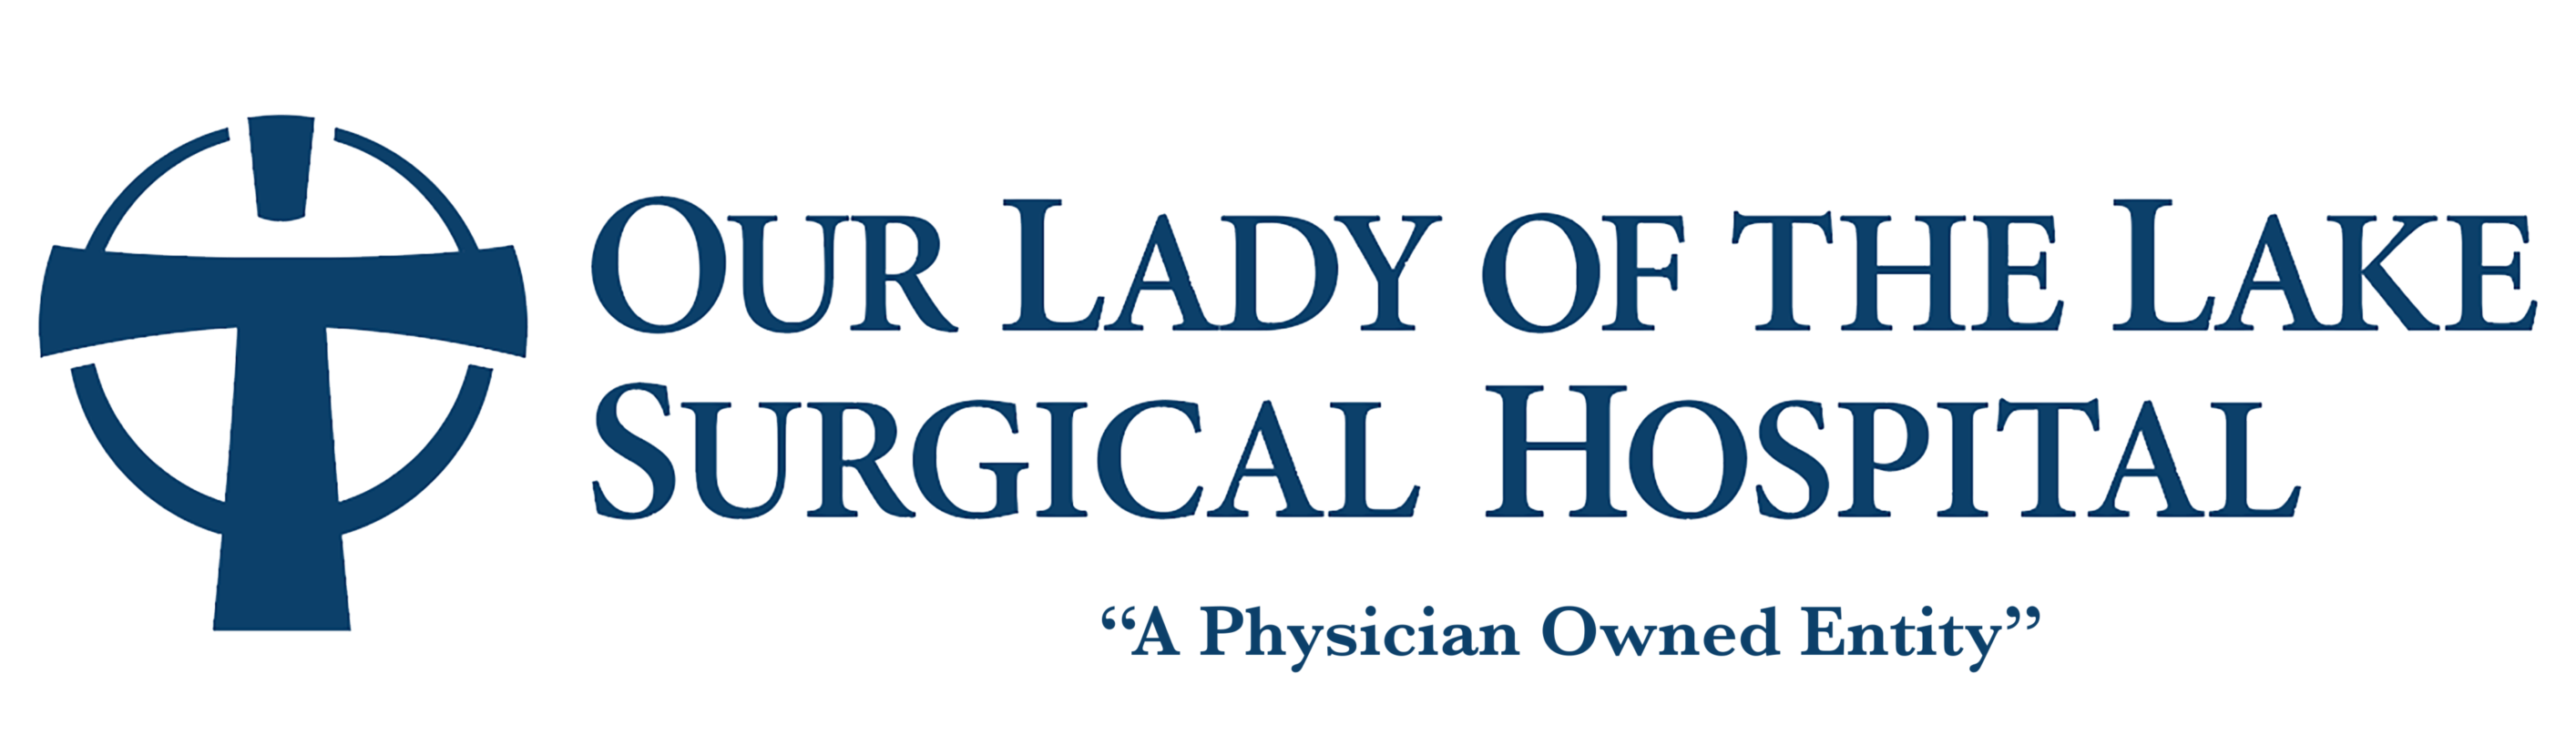 Our Lady of the Lake Surgical Hospital logo